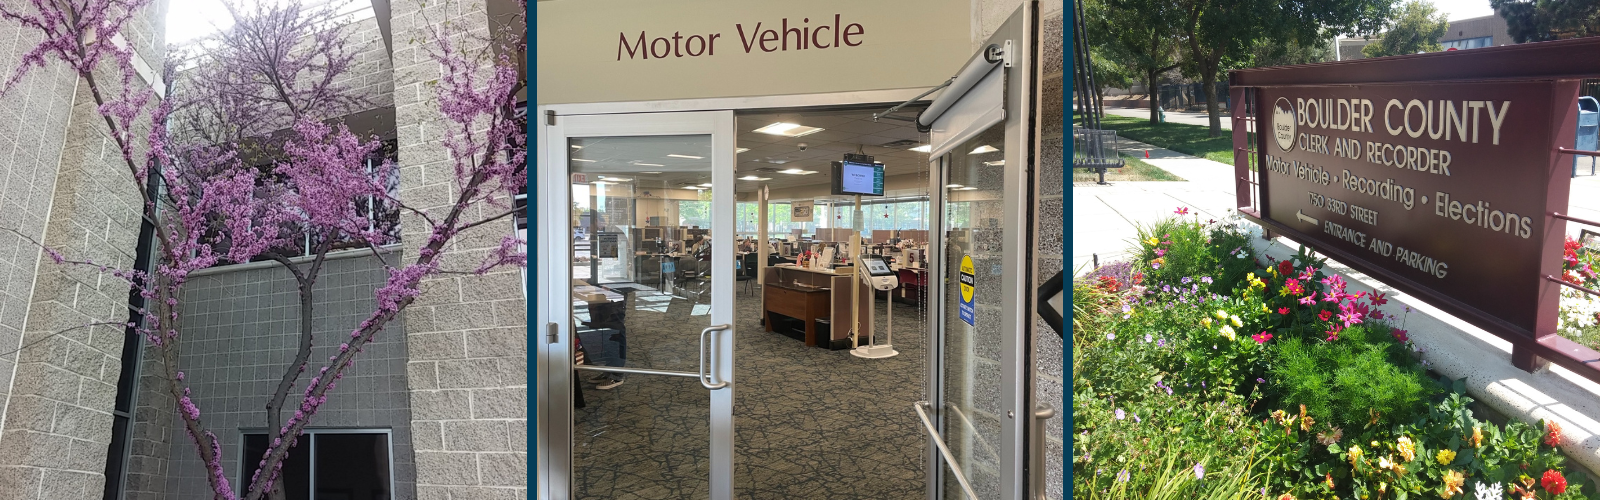 Entry to 3 motor vehicle offices